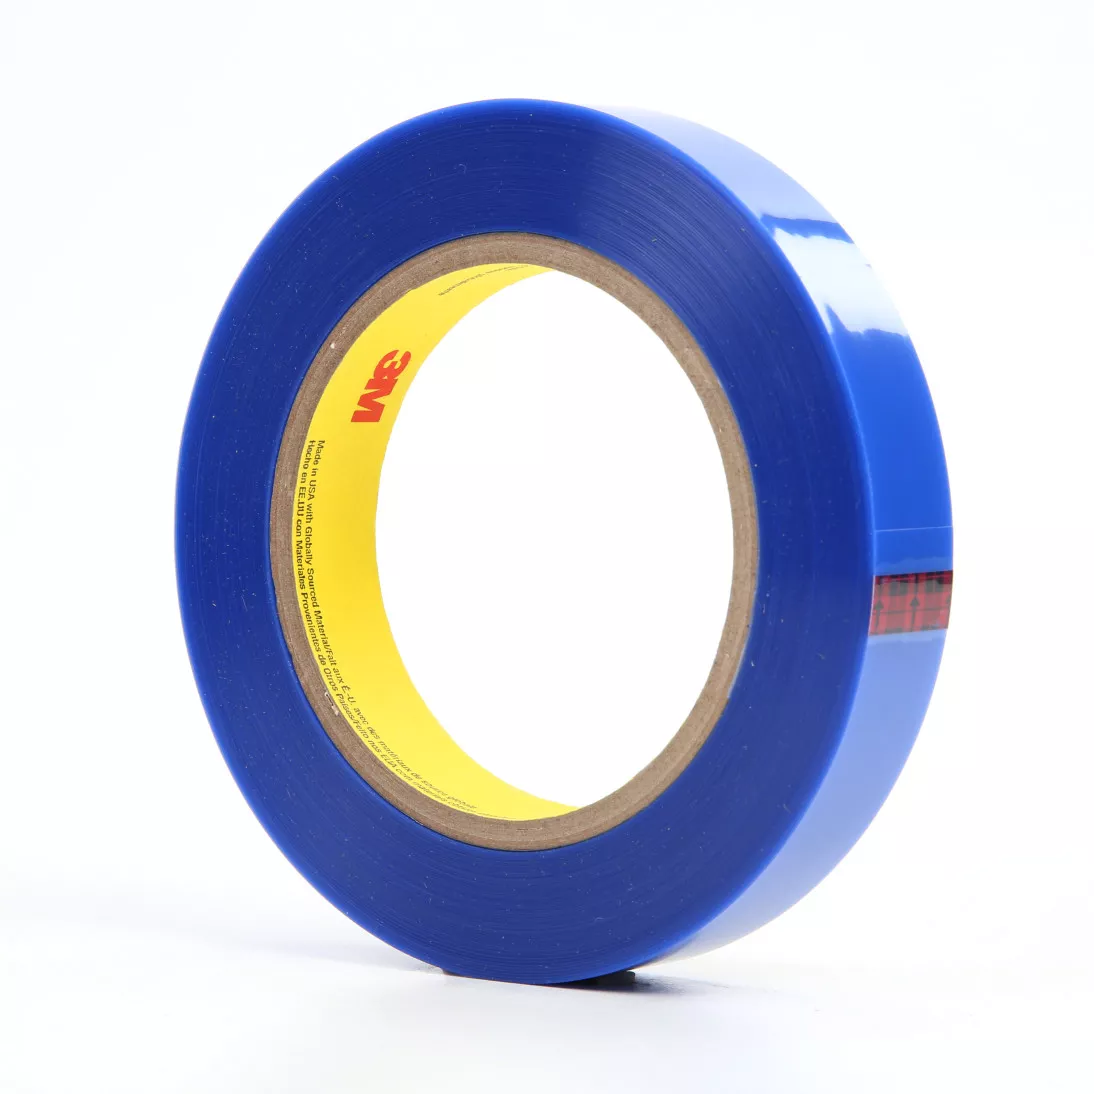 3M™ Polyester Tape 8902, Blue, 3/4 in x 72 yd, 3.4 mil, 48 rolls per
case